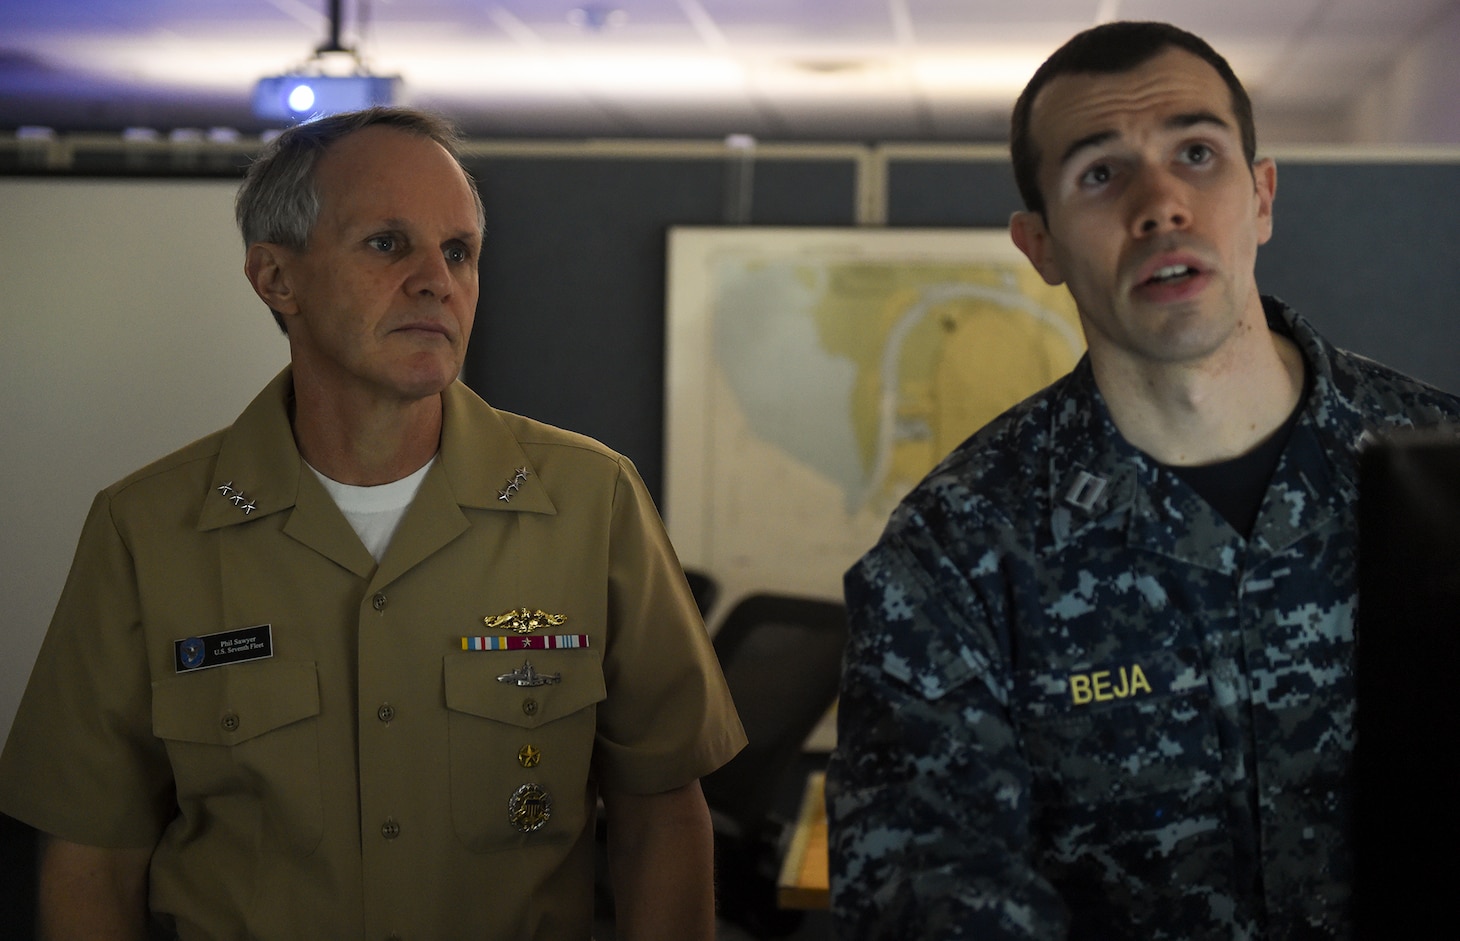 NEWPORT, R.I. (Feb. 21, 2018) Vice Adm. Phil Sawyer, commander, U.S. 7th Fleet, watches as Lt. James Beja, an instructor at Surface Warfare Officers School (SWOS), provides an overview of one of the training programs. Sawyer’s purpose was to provide an overview of 7th Fleet readiness and to provide feedback on how training ties into ensuring safe and effective operations at sea.